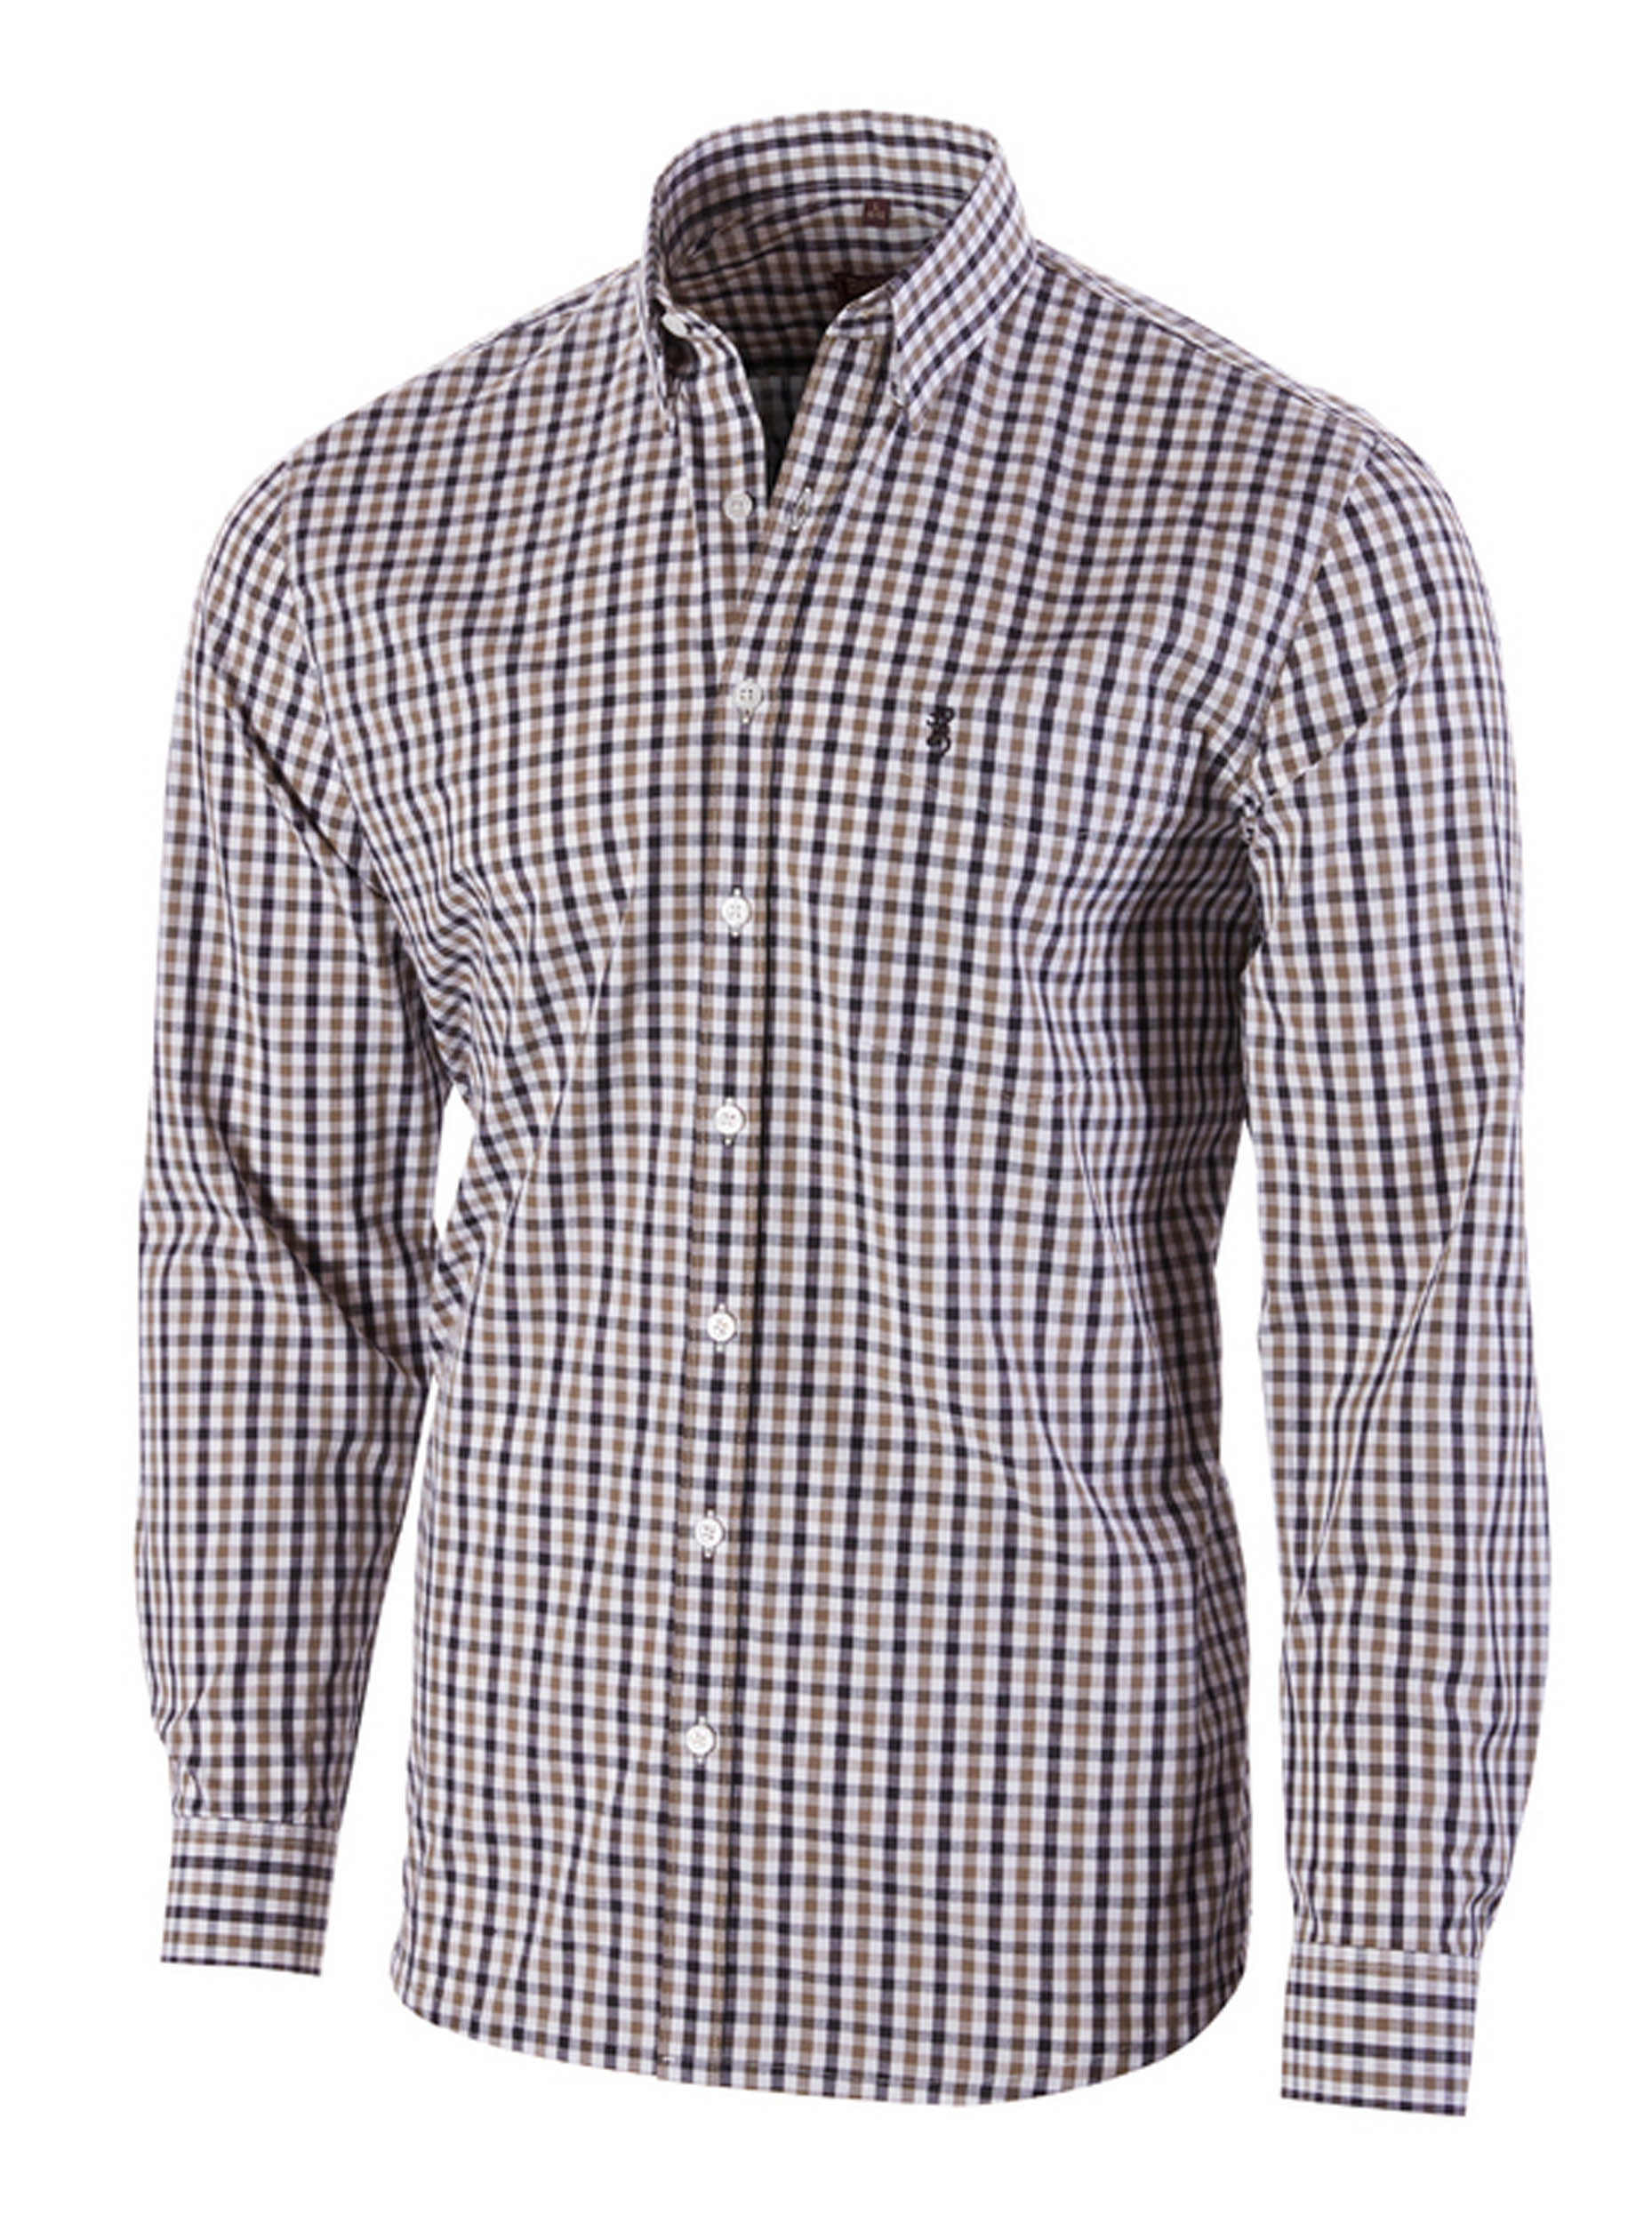 CHEMISE SEAN BRUNE - TAILLE L - Browning